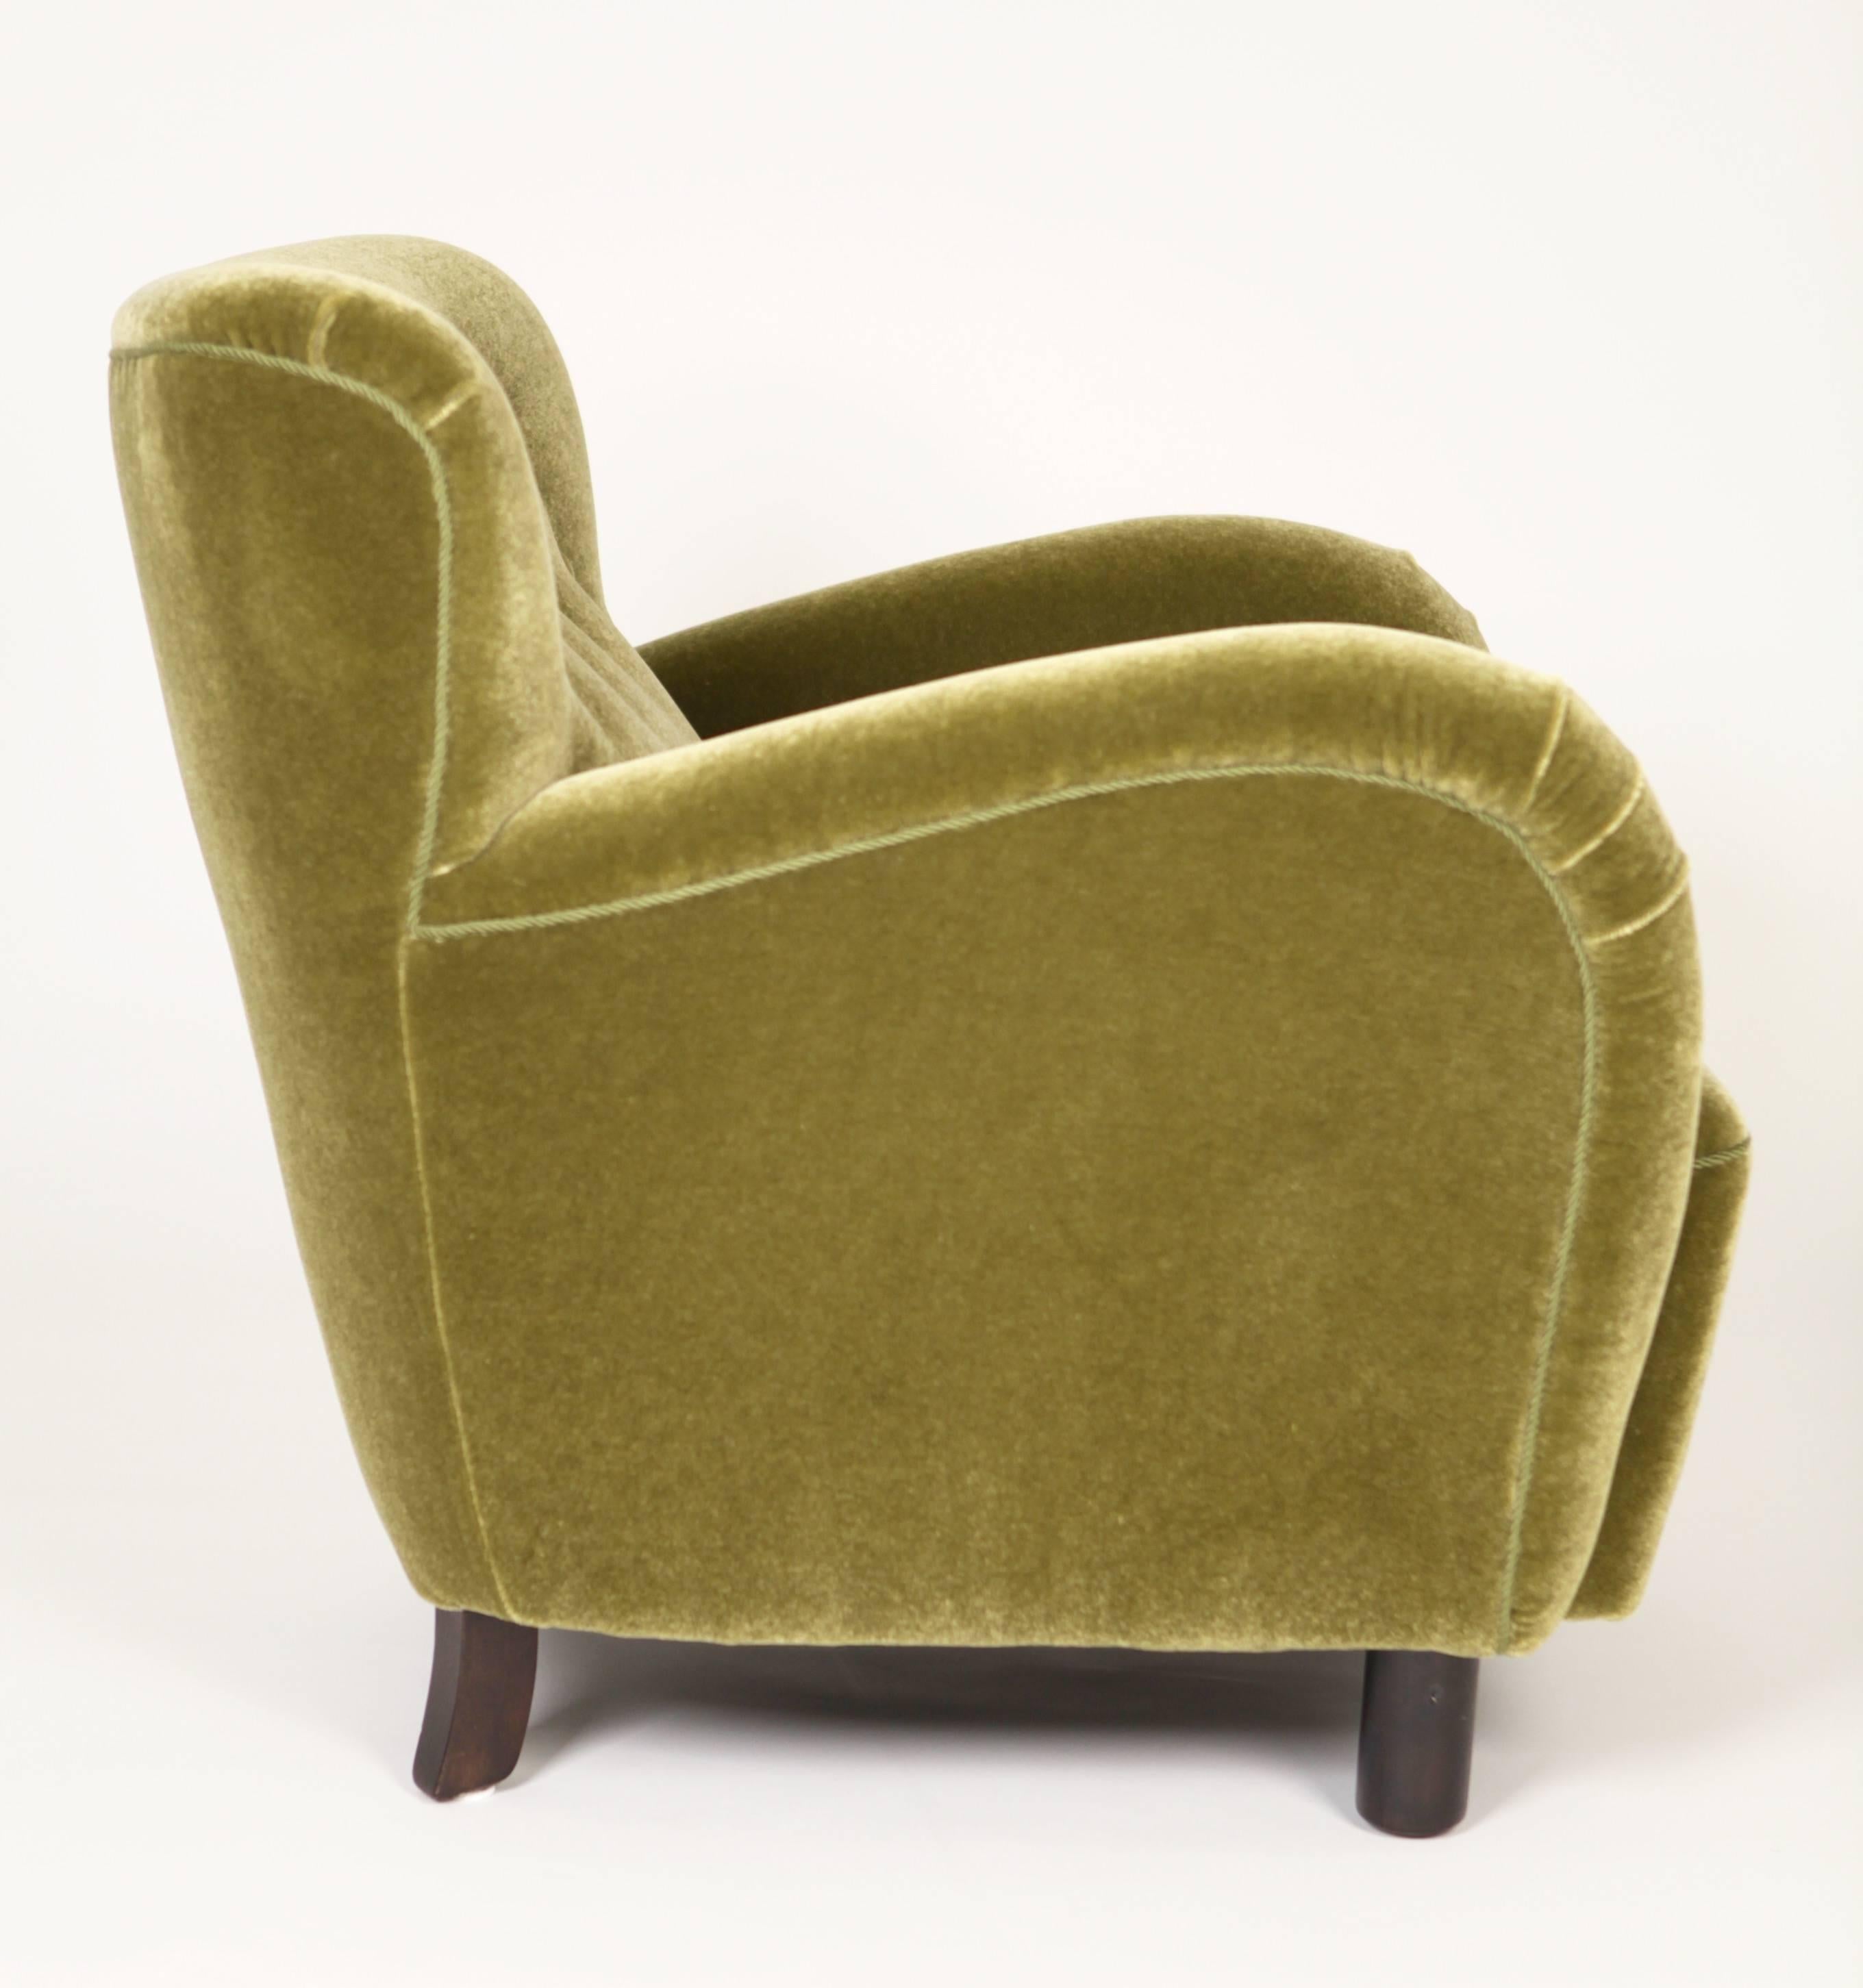 Armchair, attributed to Flemming Lassen, Denmark, 1930s-1940s

Reupholstered in green mohair.